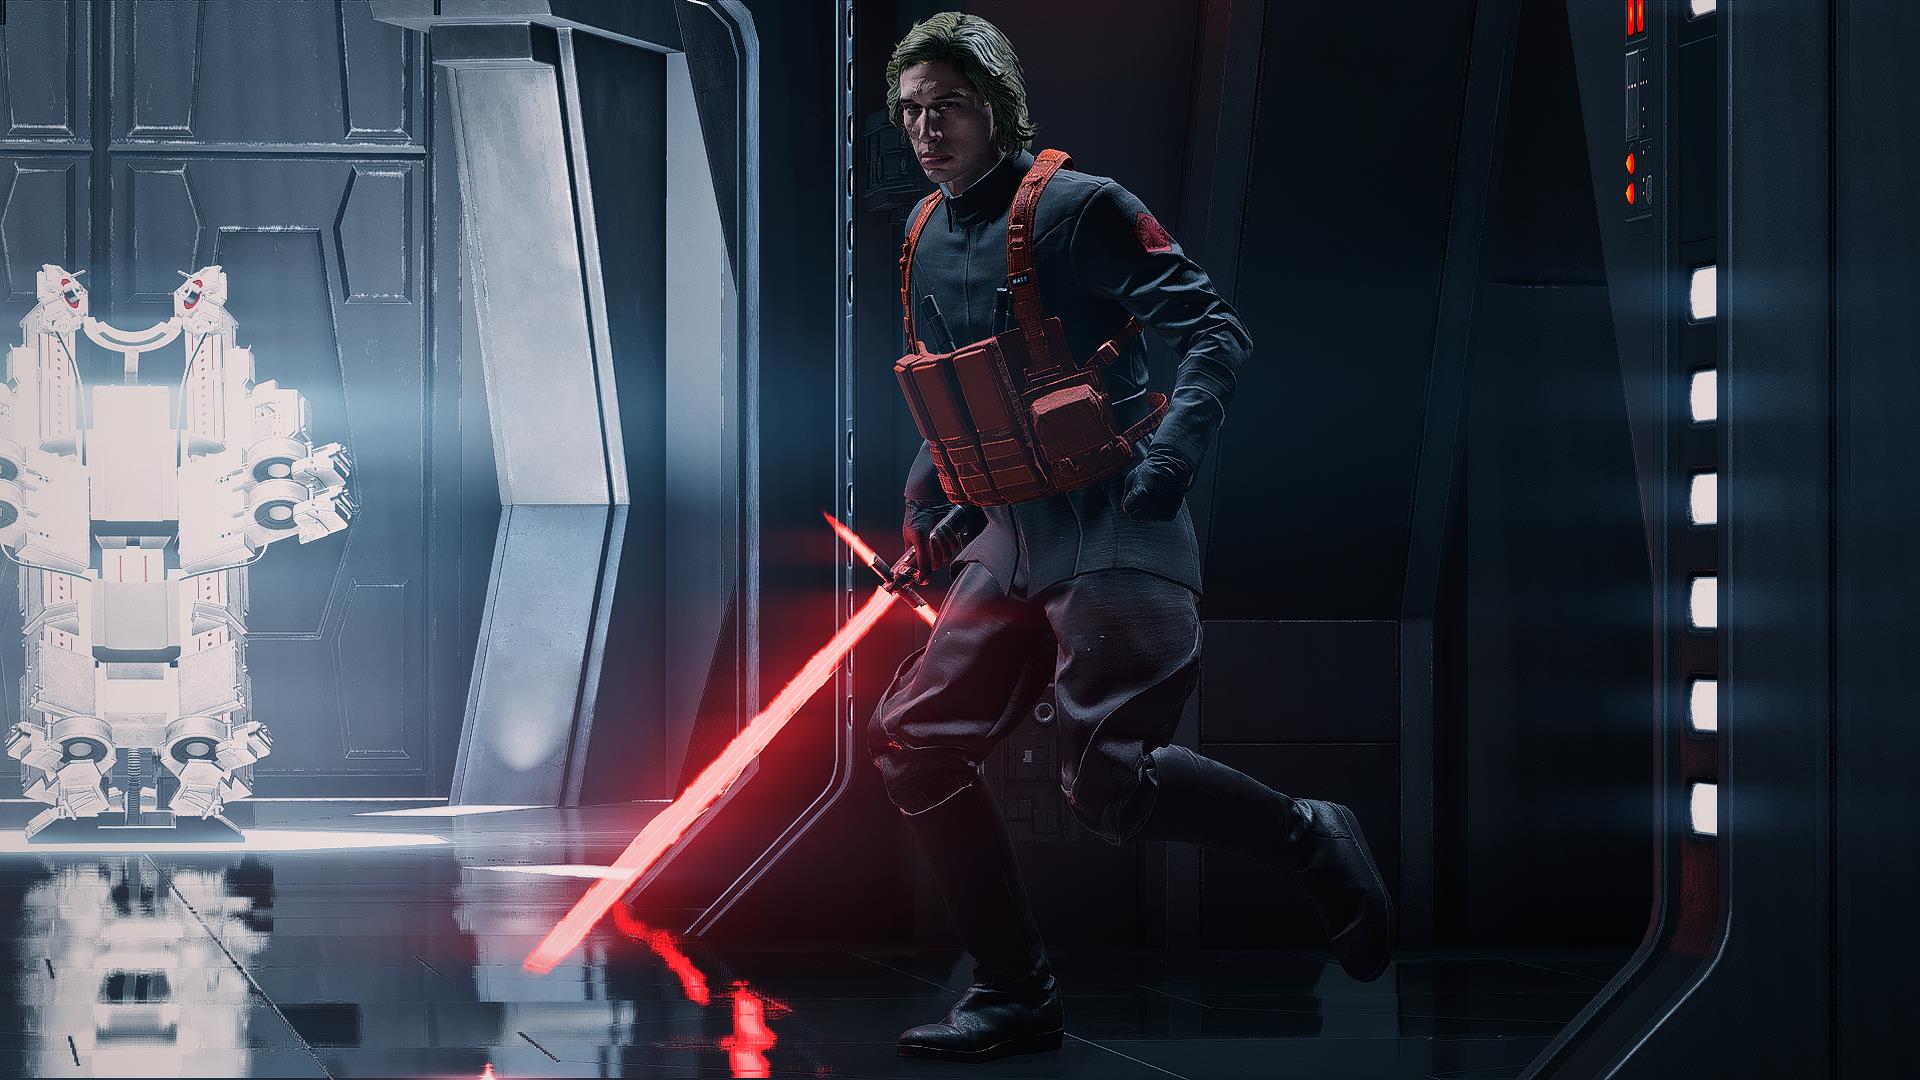 Image for Star Wars Battlefront 2 patch 1.2 introduces major hero and villain balance tweaks and a new limited time game mode